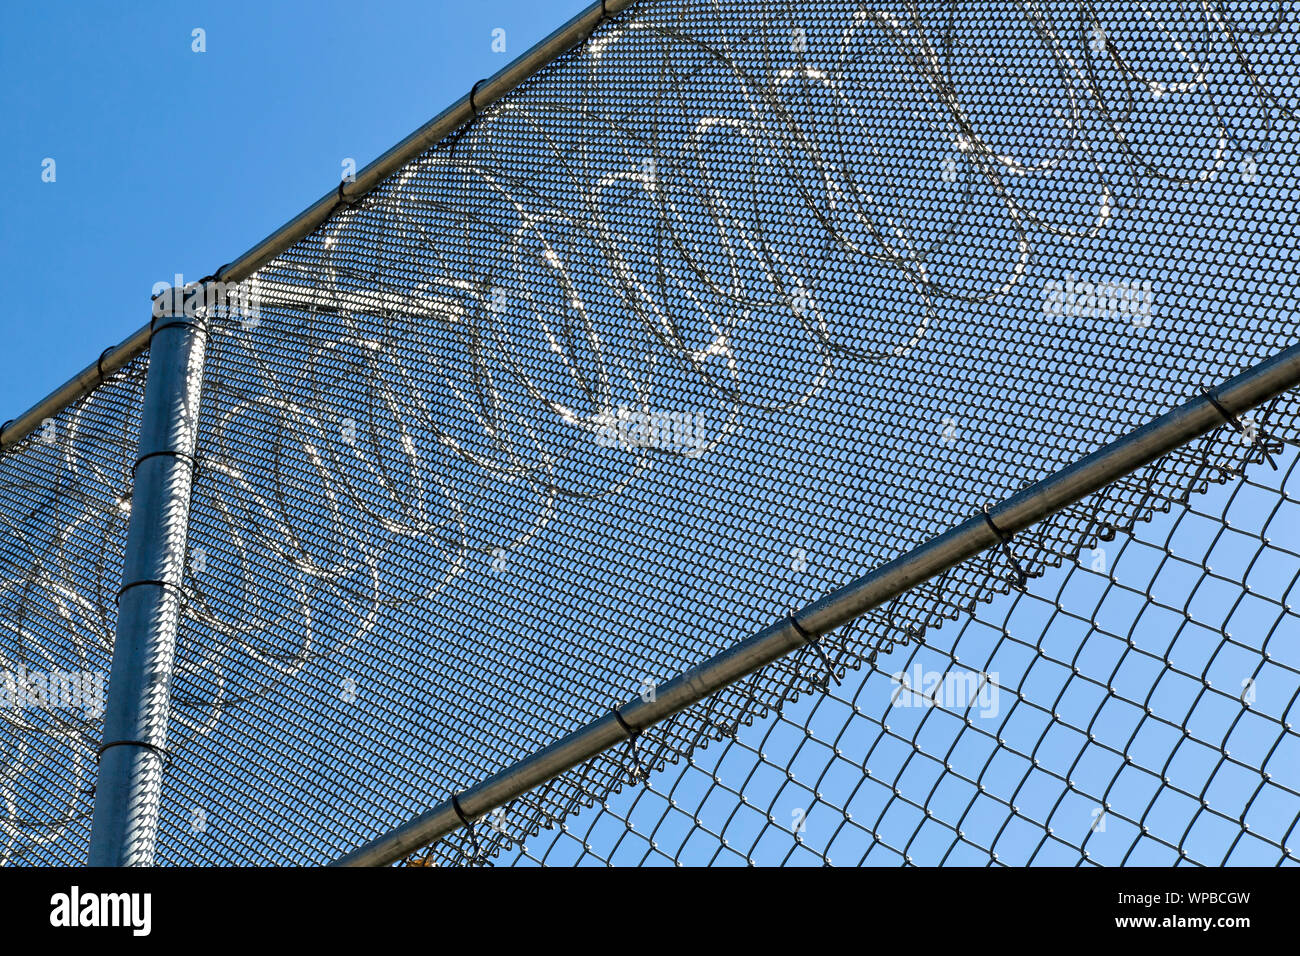 Prison security fence. Stock Photo